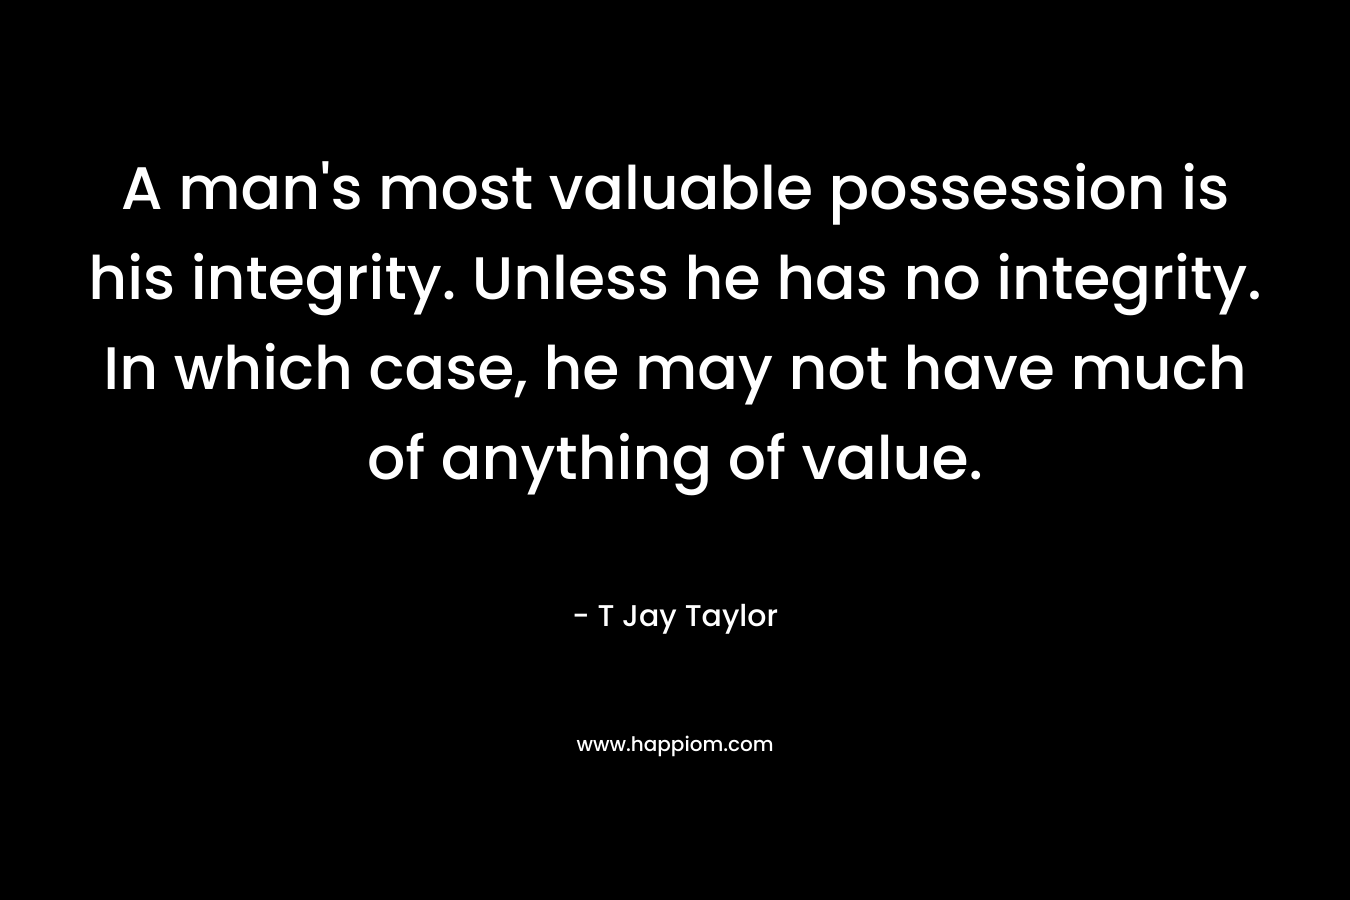 A man’s most valuable possession is his integrity. Unless he has no integrity. In which case, he may not have much of anything of value. – T Jay Taylor